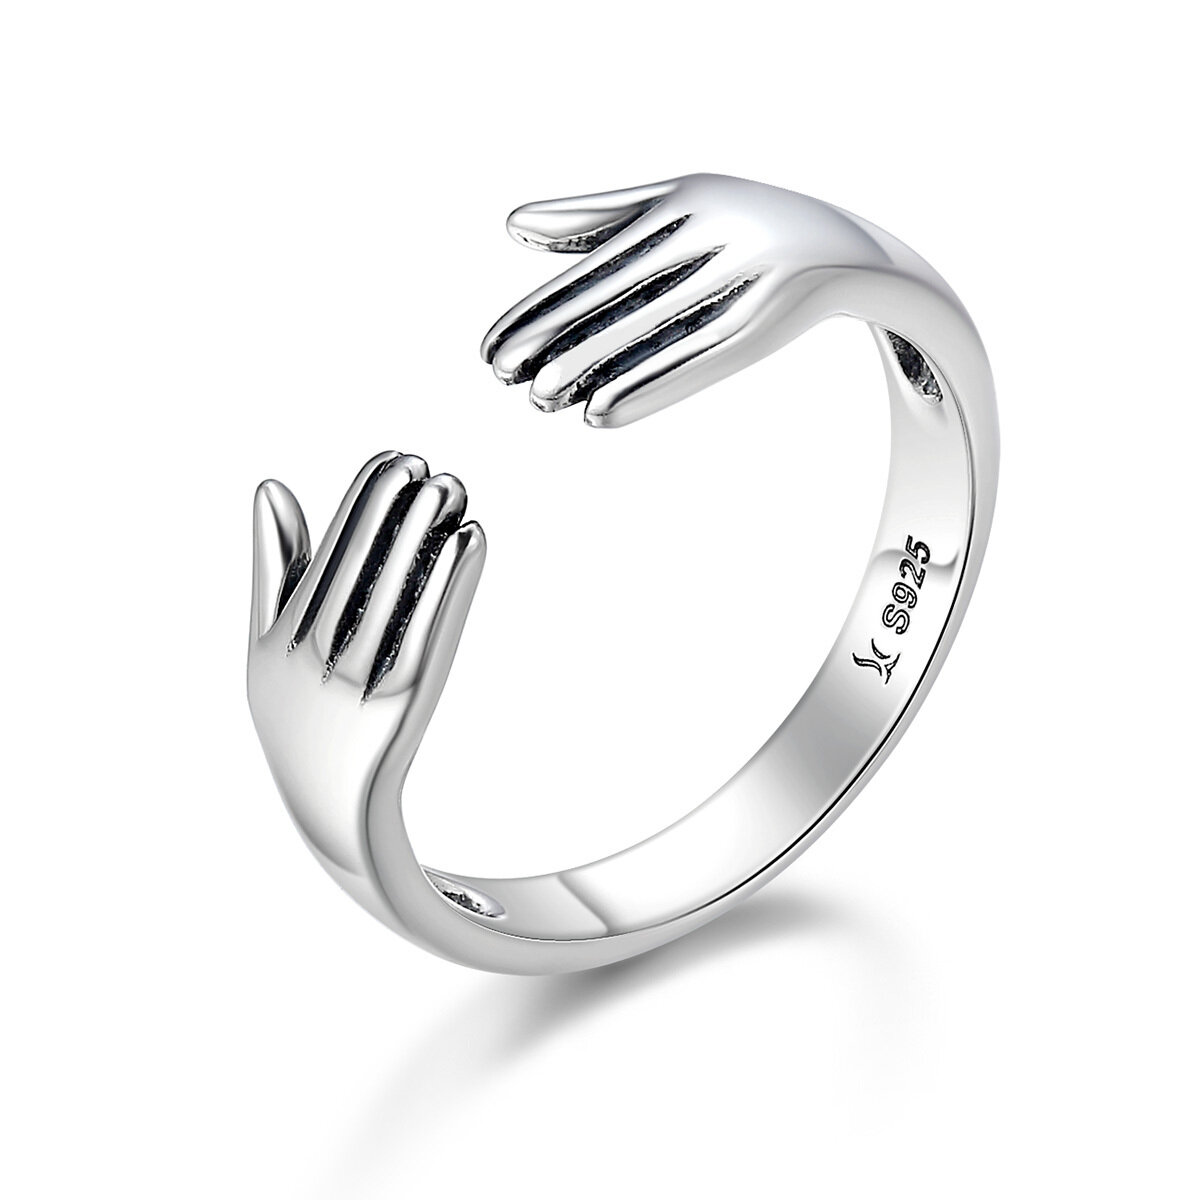 GemKing SCR136 Give me a hug S925 Sterling Silver Ring